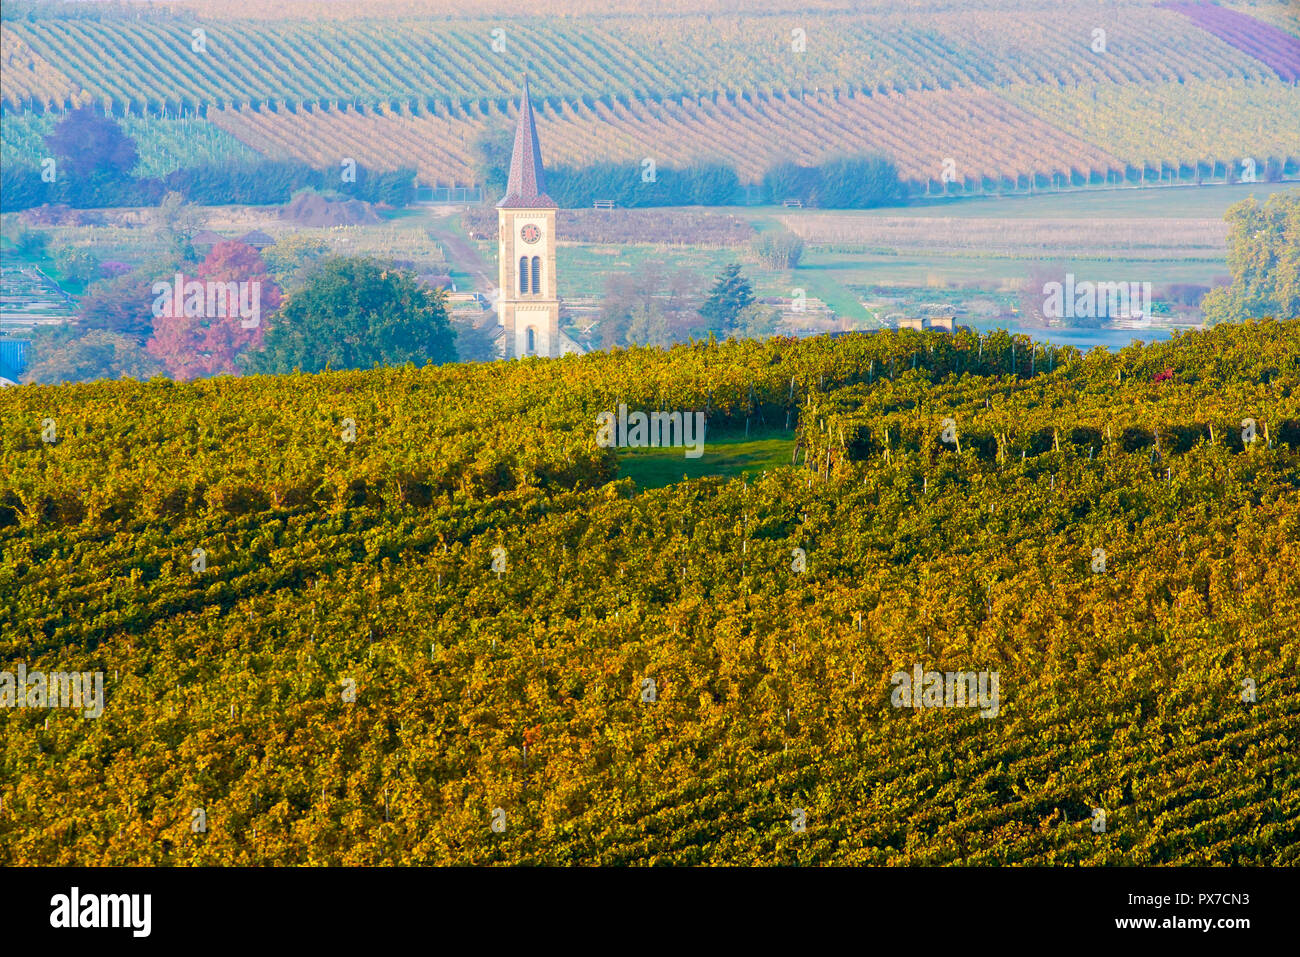 Picturesque vineyards in autumn colors, Baden Württemberg. Germany. Stock Photo